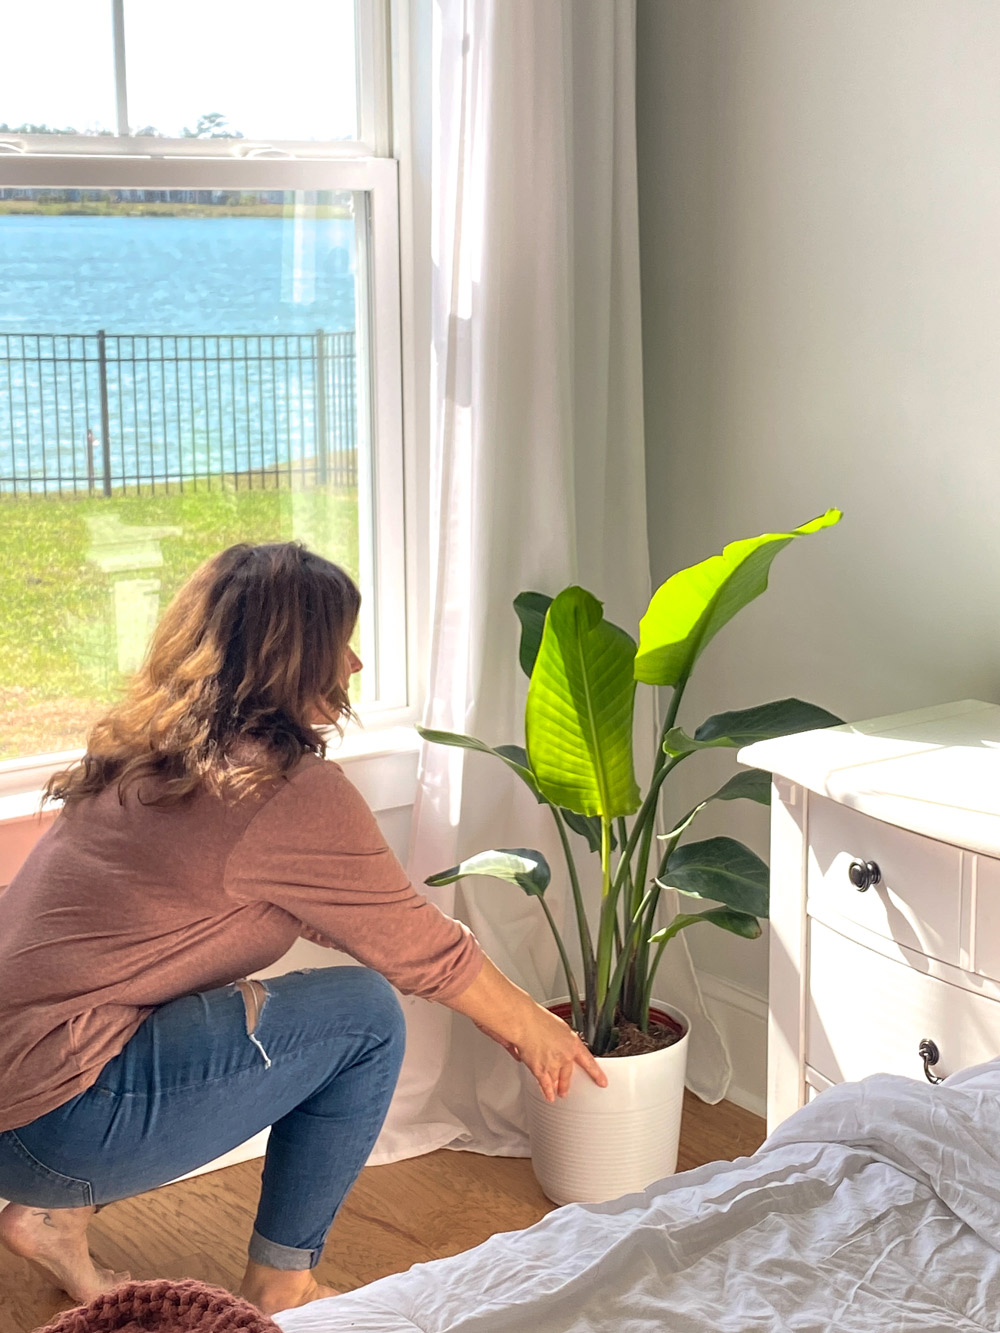 Woman placing a potted plant in the corner of a room.